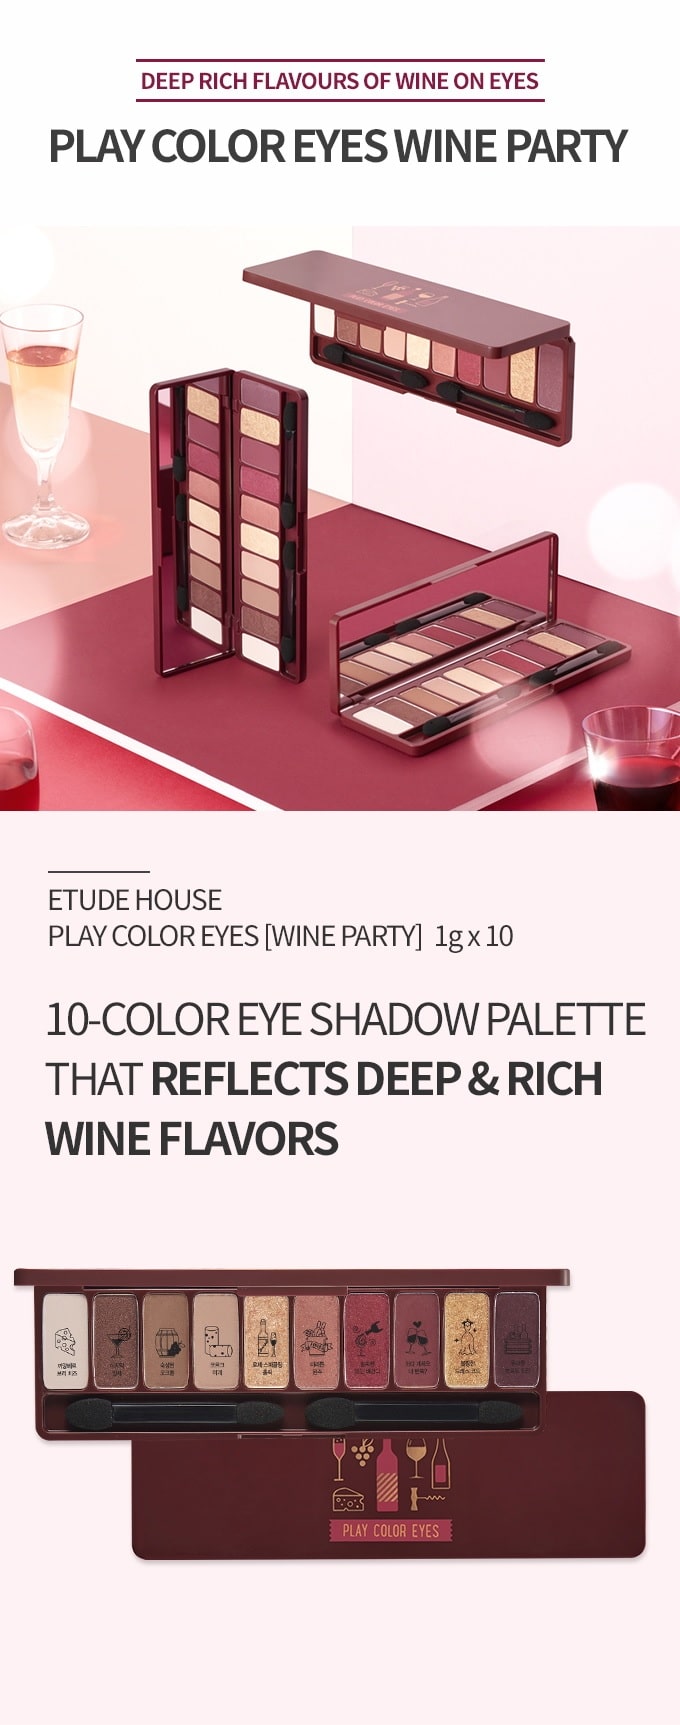 Play Color Eyes #Wine Party